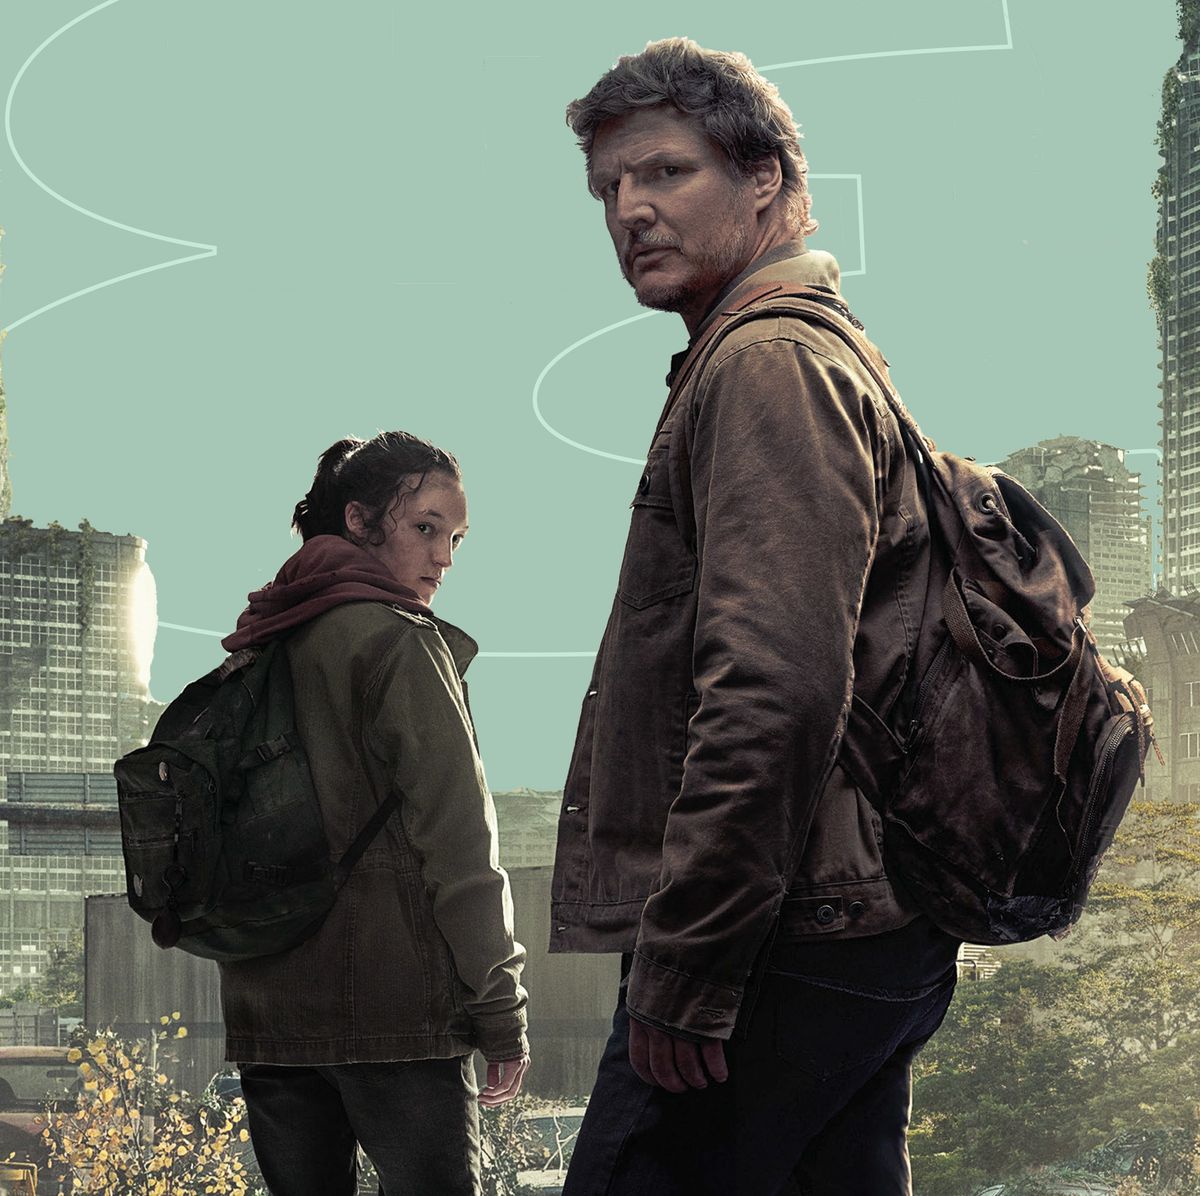 The Last of Us' Review: The HBO Adaptation is 2023's First Great